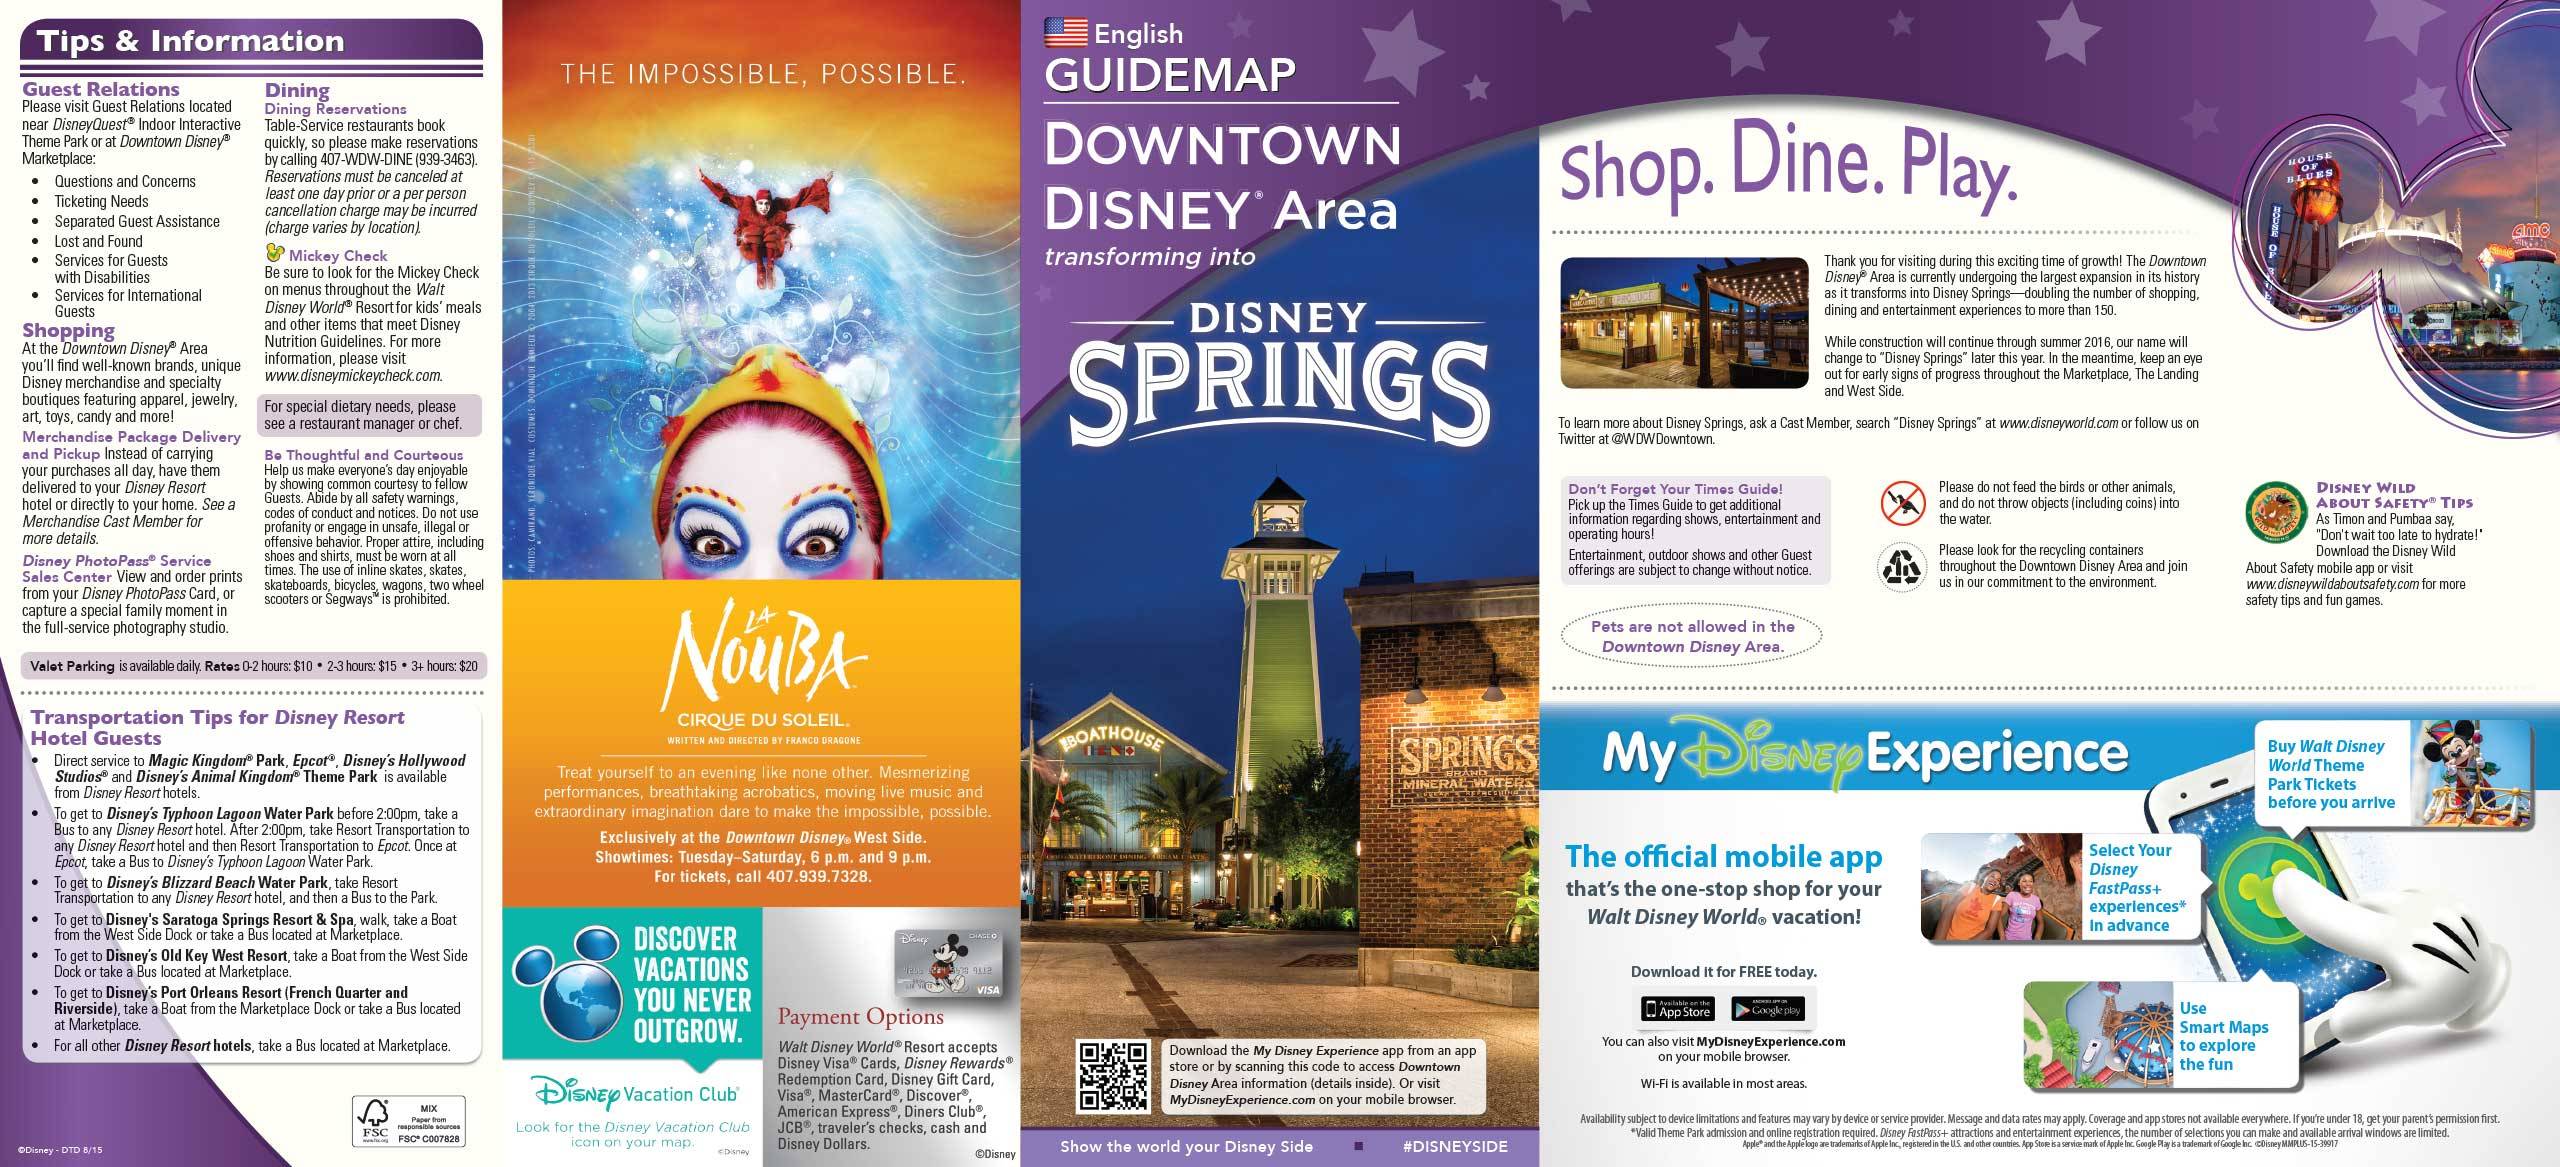 PHOTOS - New Downtown Disney guide map includes Disney Springs name and new restaurants